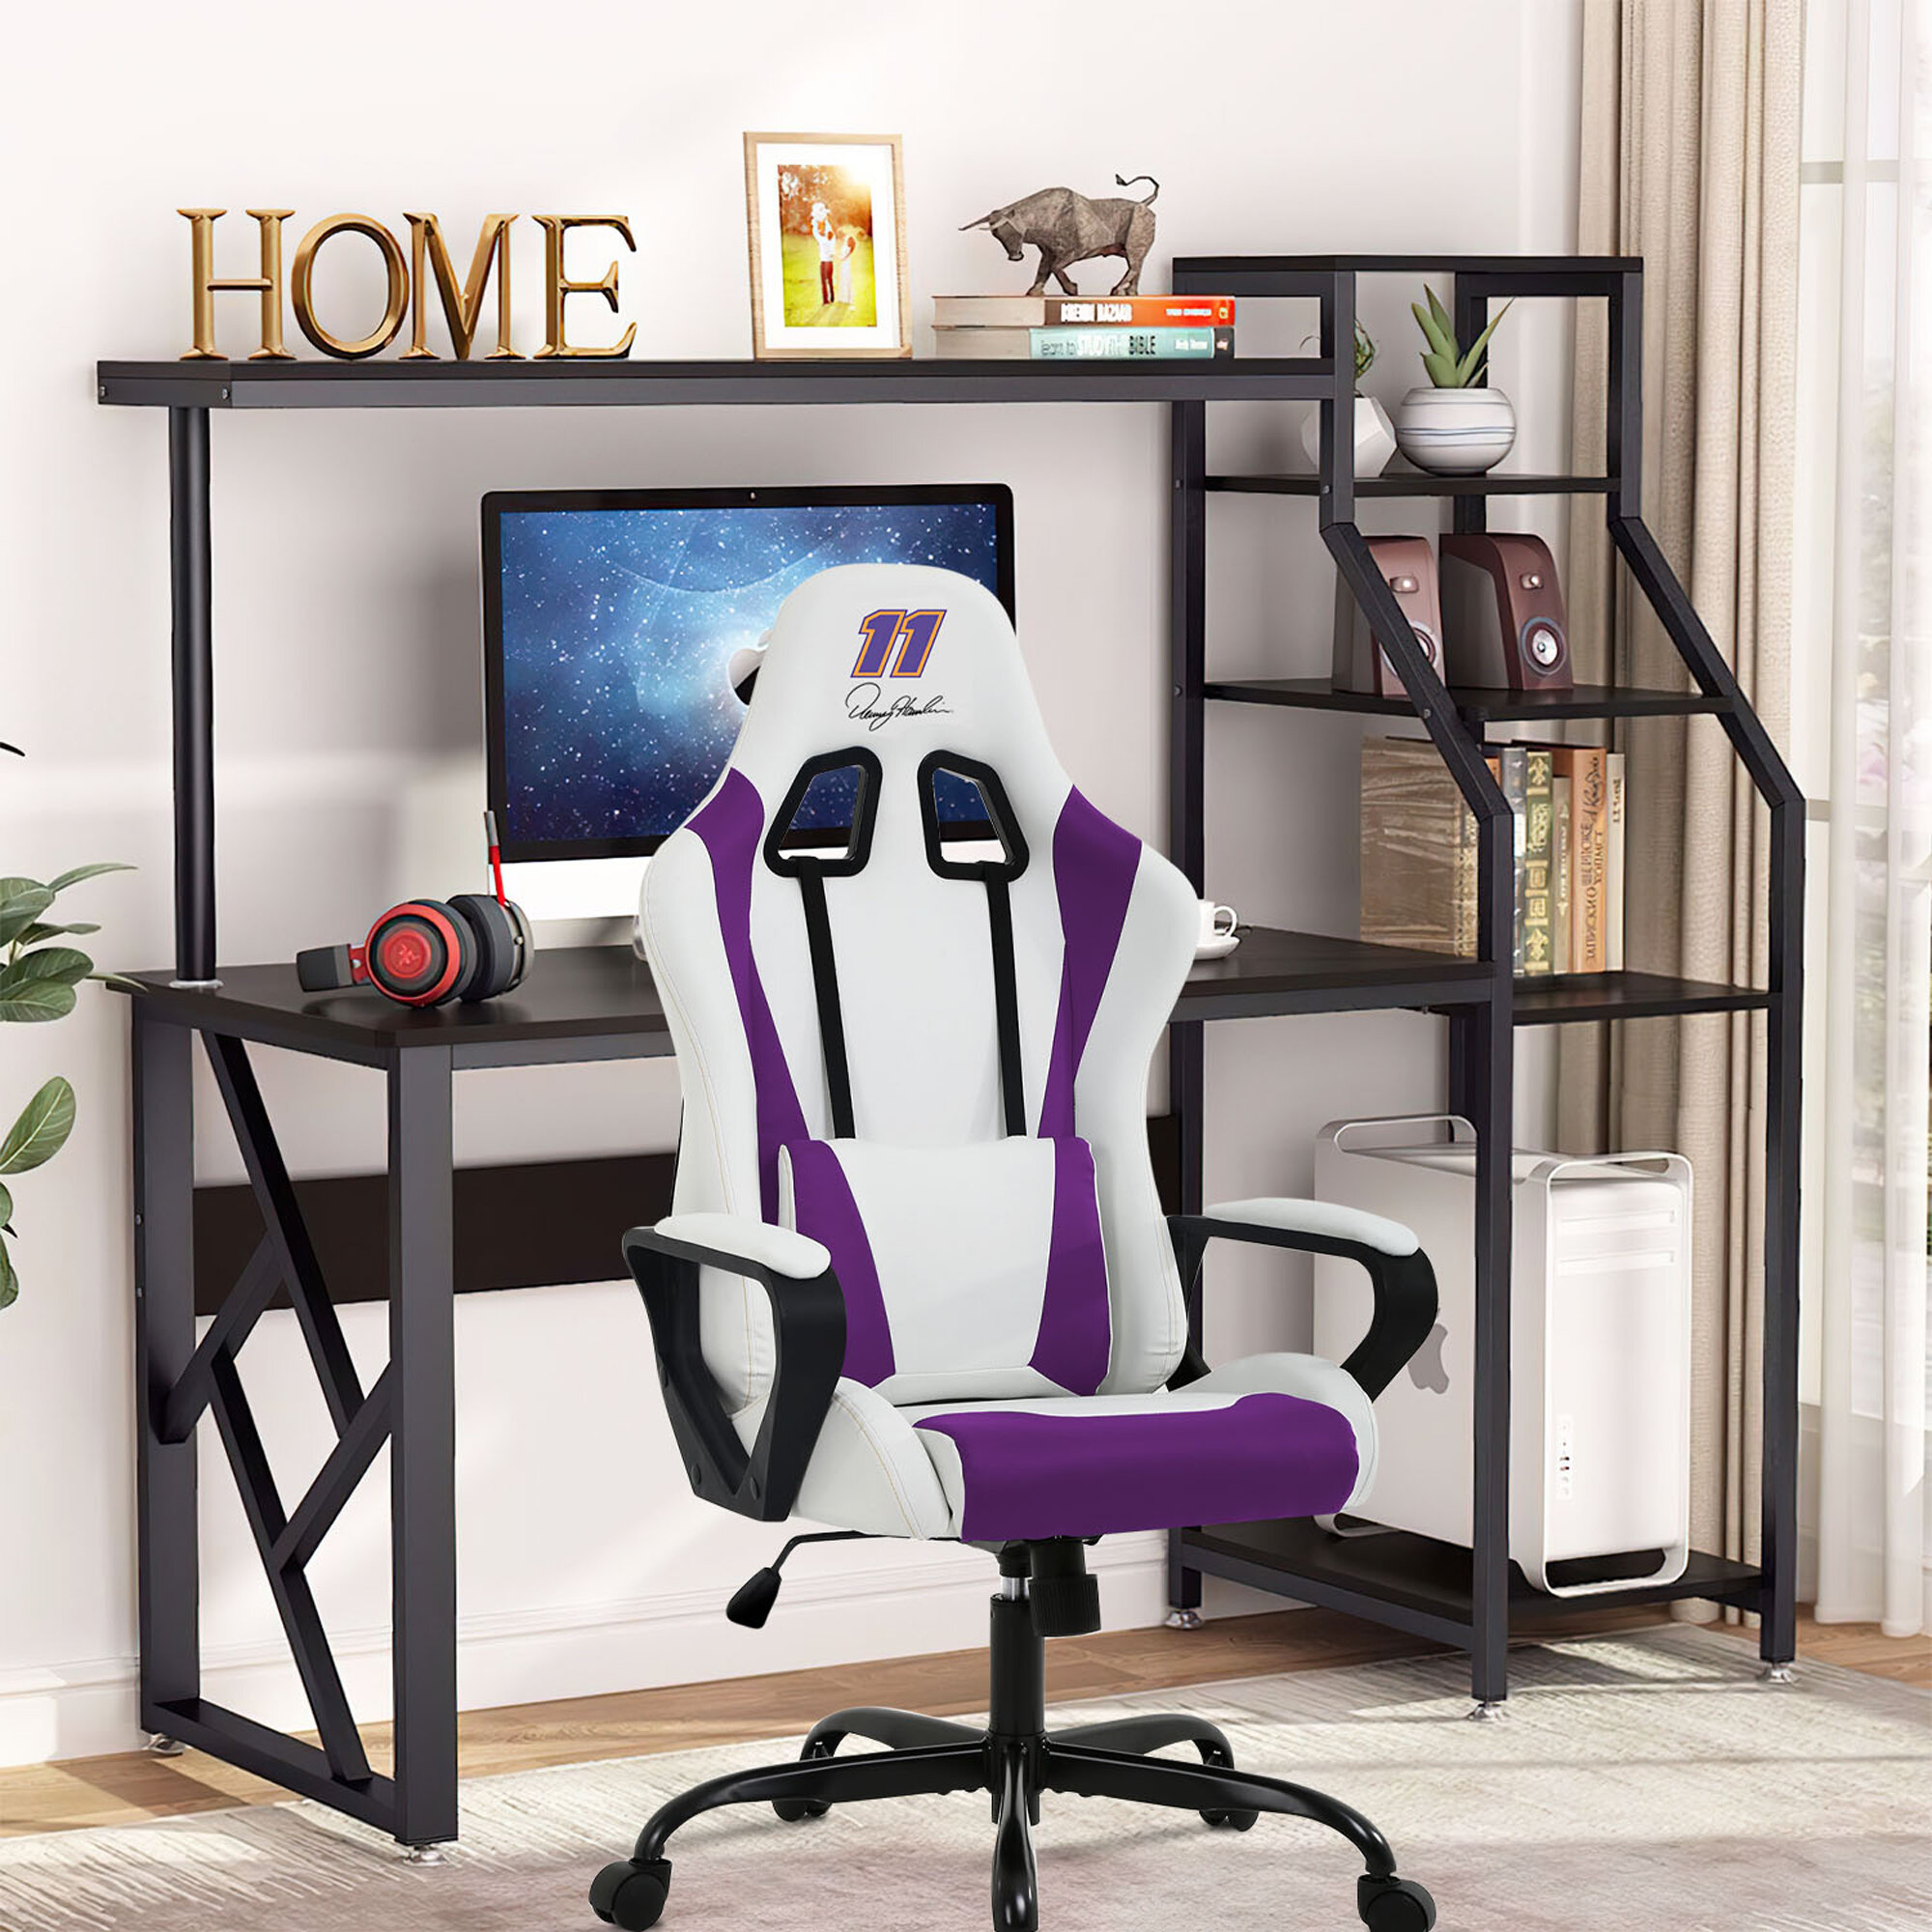 SWIVEL PU LEATHER OFFICE RACING GAMING CHAIR ADJUSTABLE ERGONOMIC COMPUTER CHAIR 